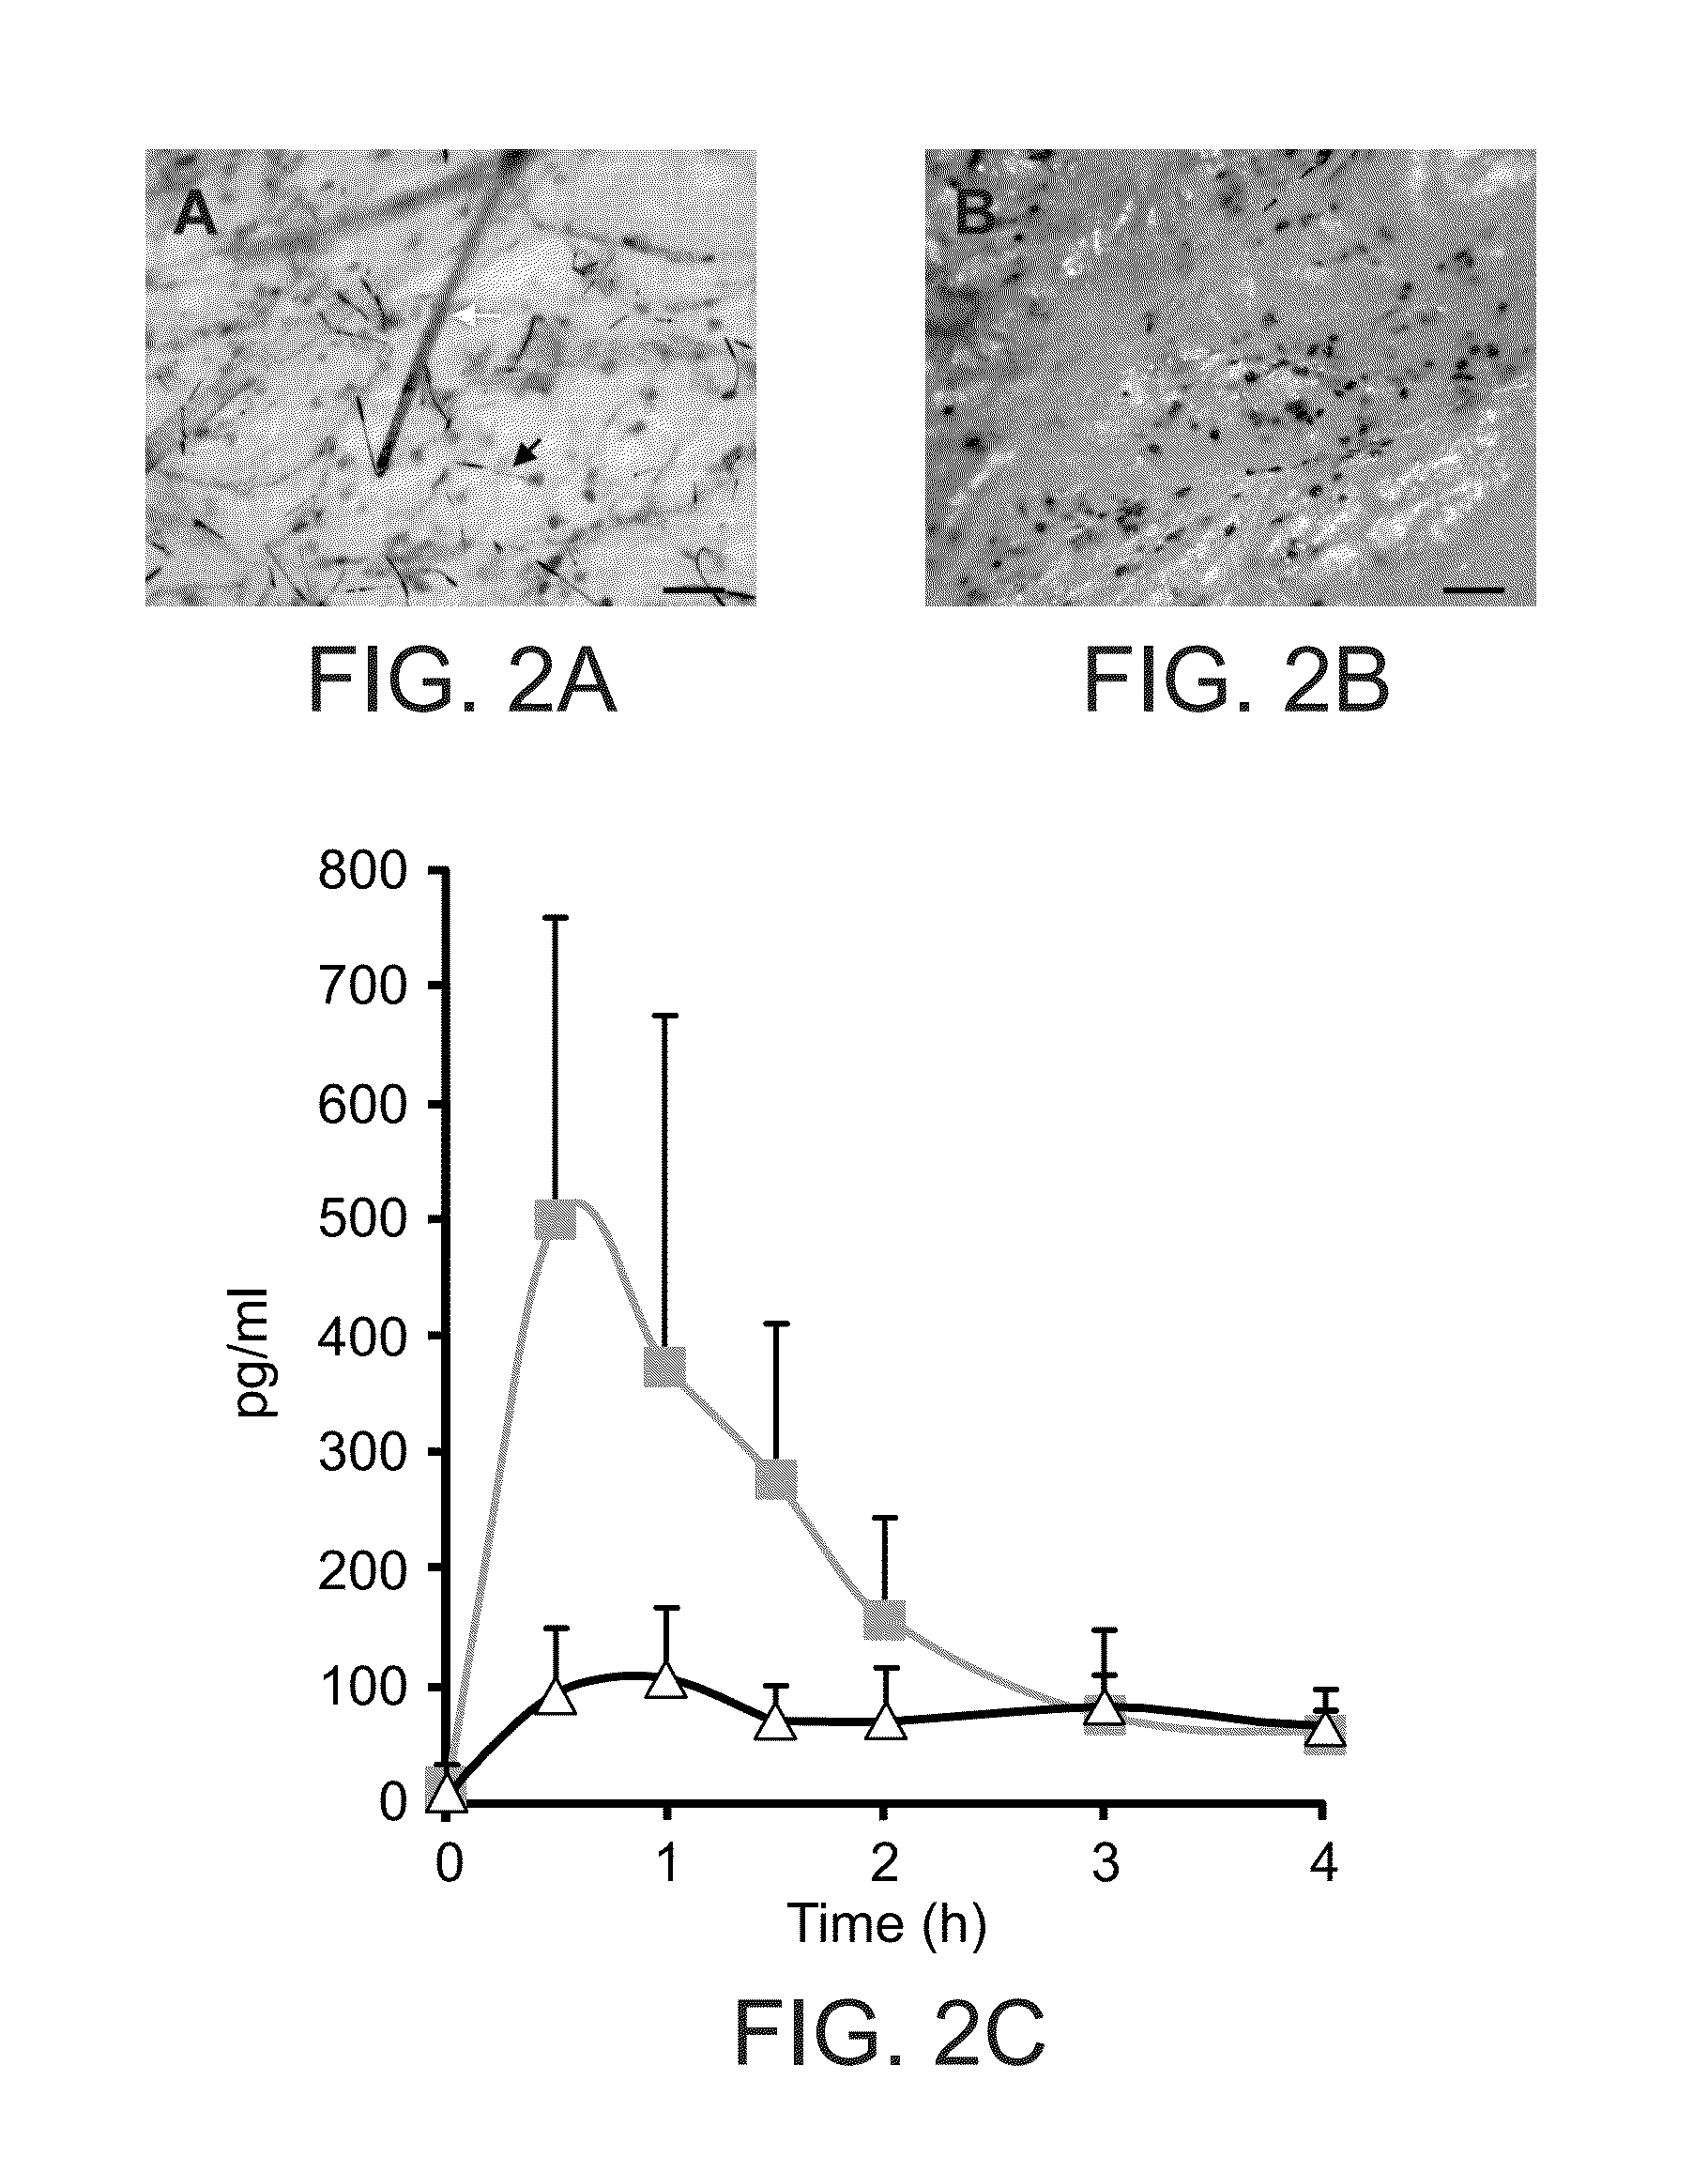 Pharmaceutical compositions and delivery devices comprising stinging cells or capsules